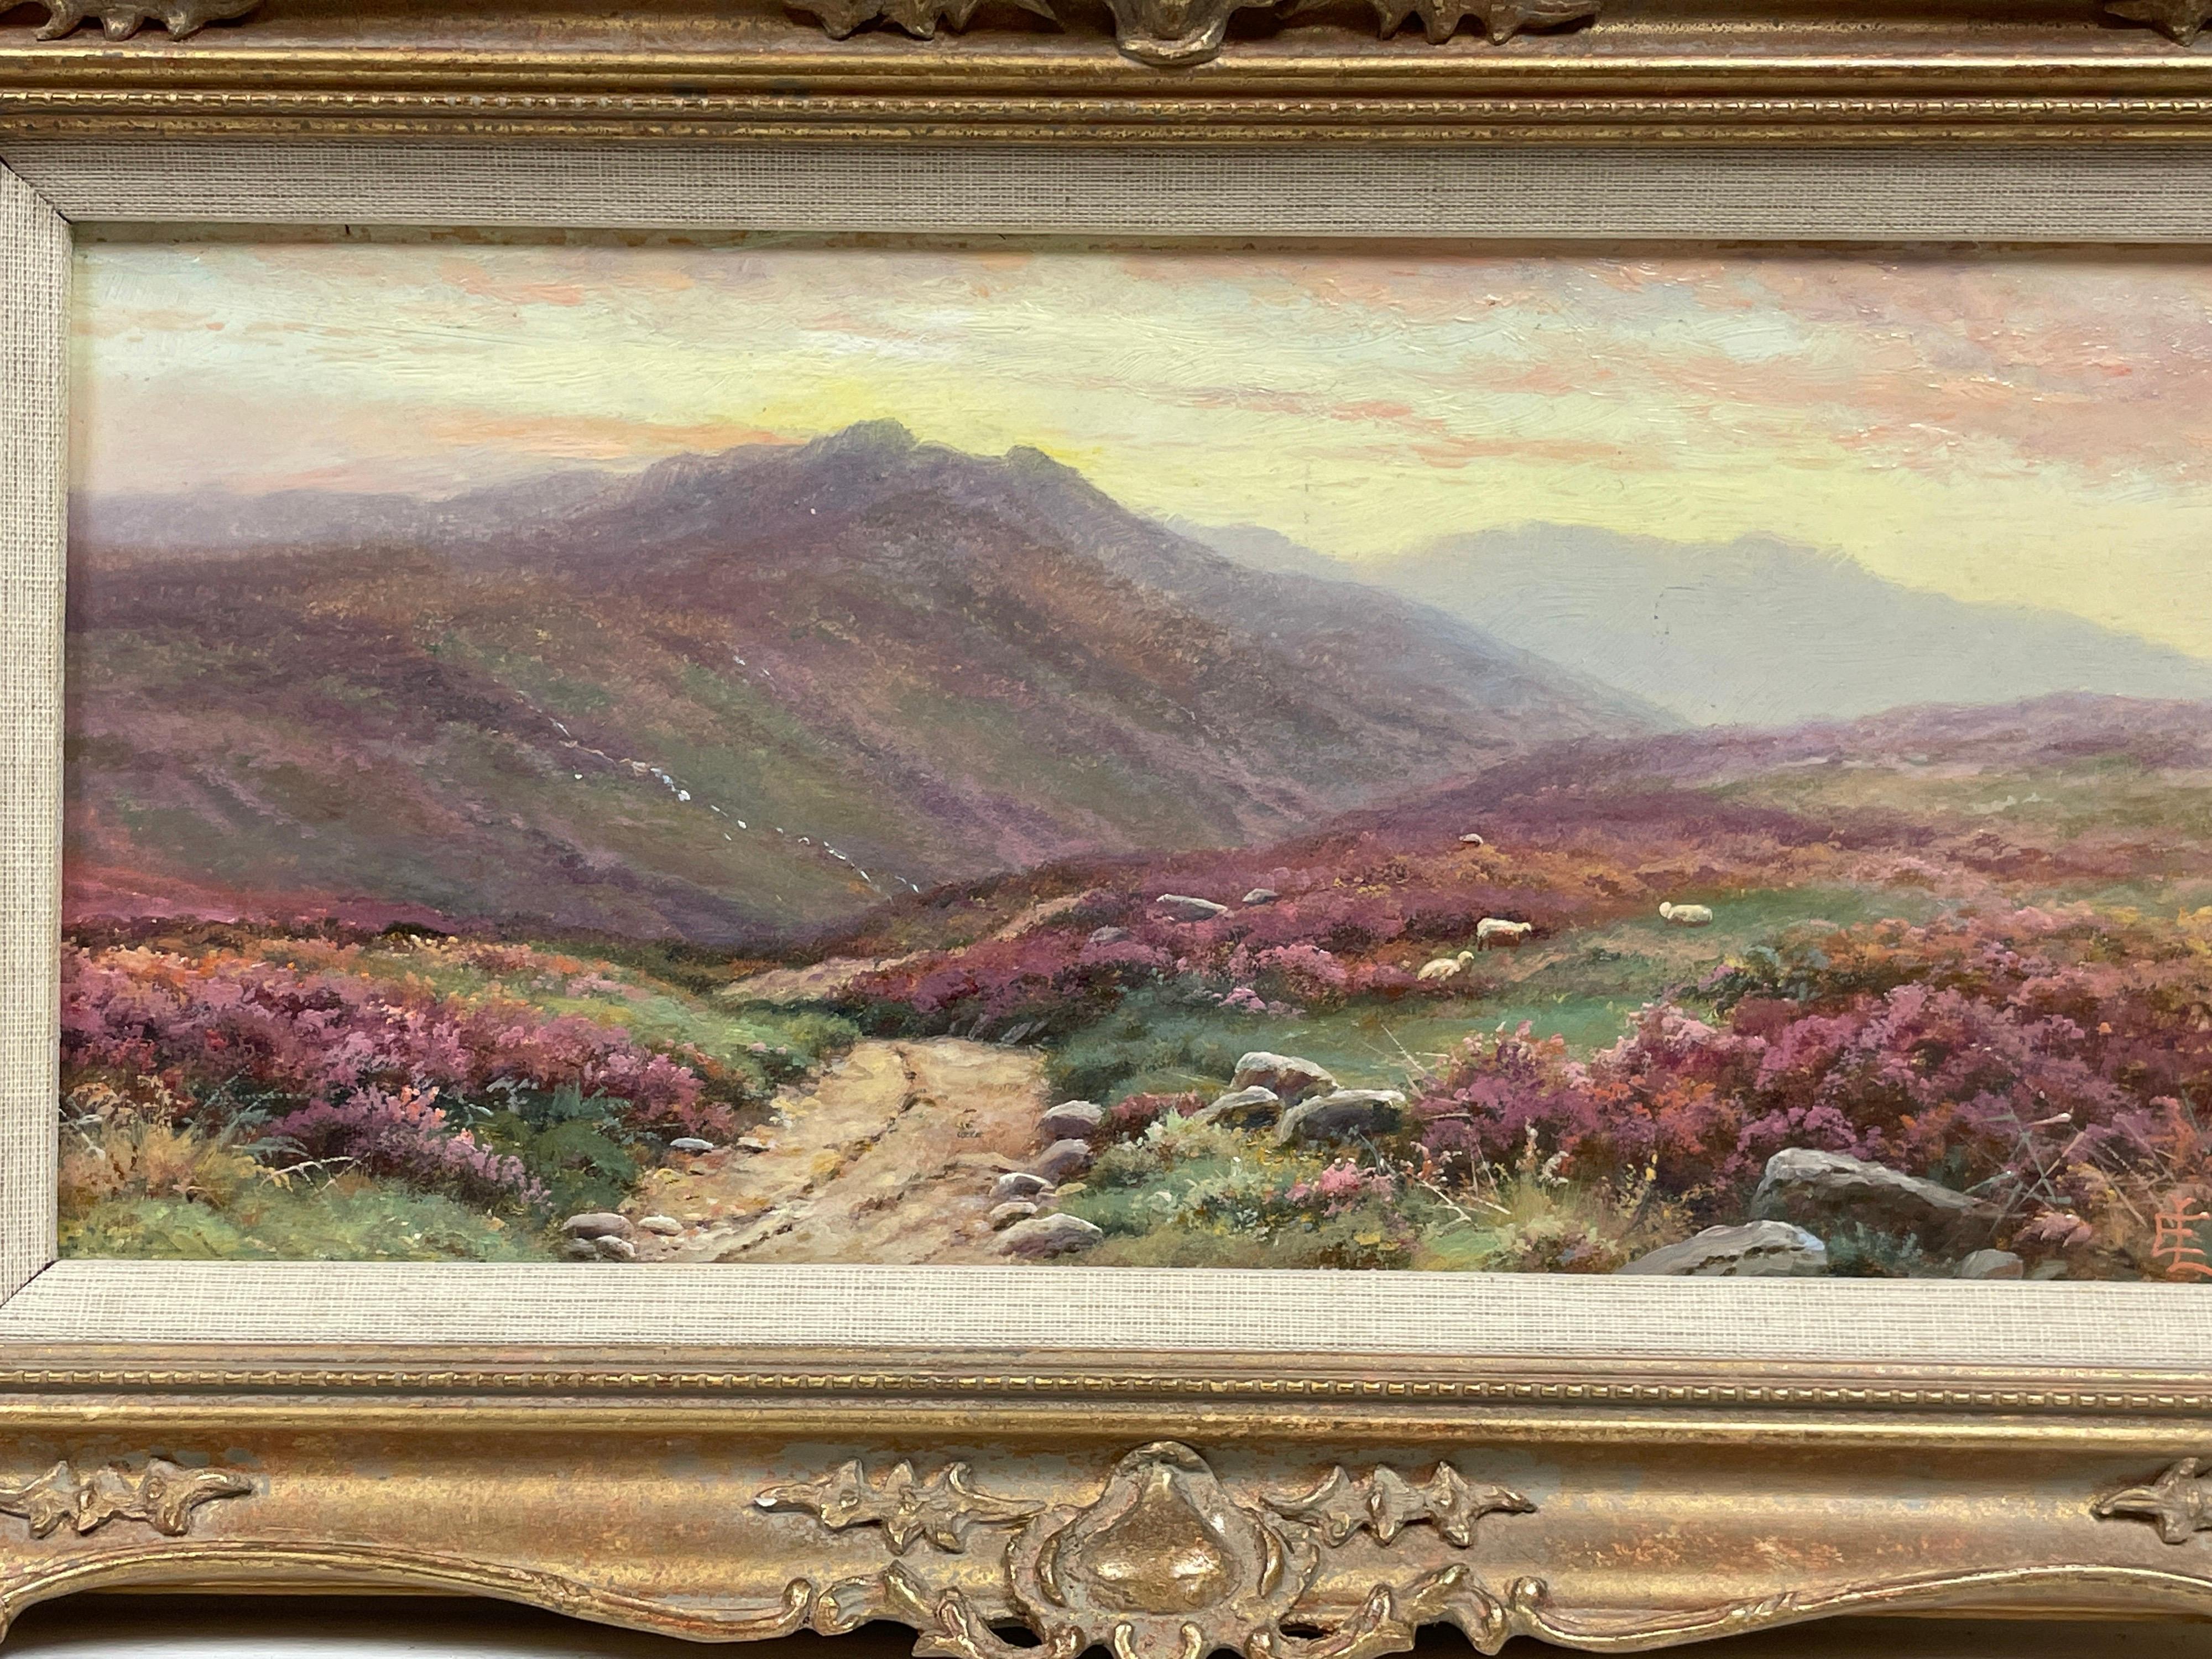 The Scottish Highlands
by Edgar Longstaffe (British 1852-1933)
pair of oil paintings on board, framed
each painting is signed with the artists monogram
each painting framed is: 9 x 15 inches
condition: both in very good and ready to hang